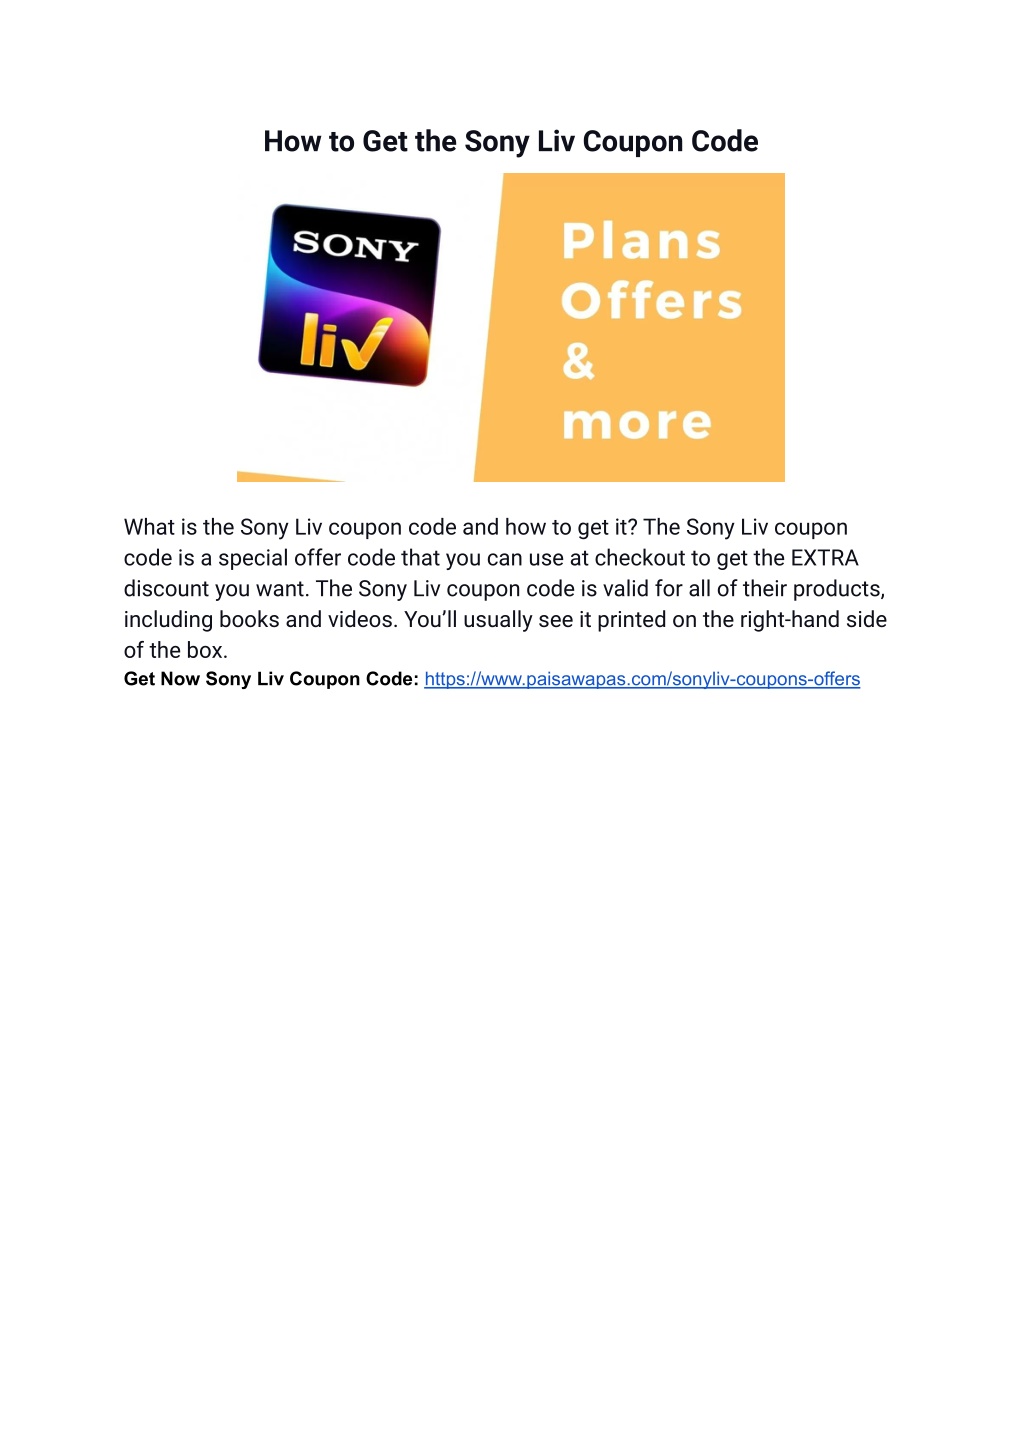 PPT How to Get the Sony Liv Coupon Code PowerPoint Presentation, free